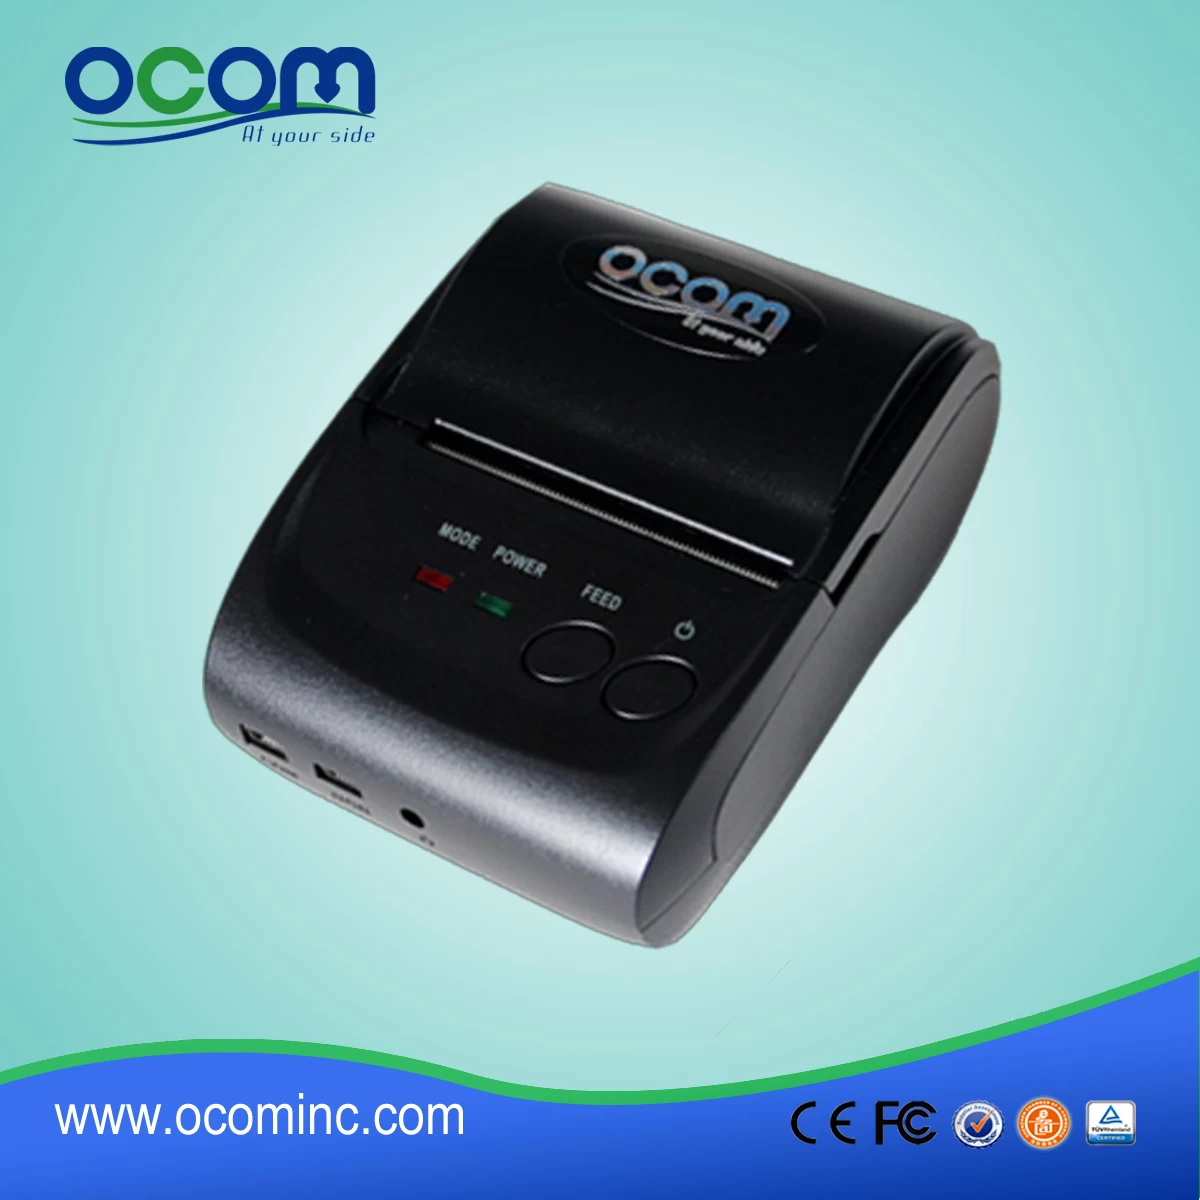 OCPP-M05: 58mm Android & IOS Portable Bluetooth Thermal Printer with Android SDK